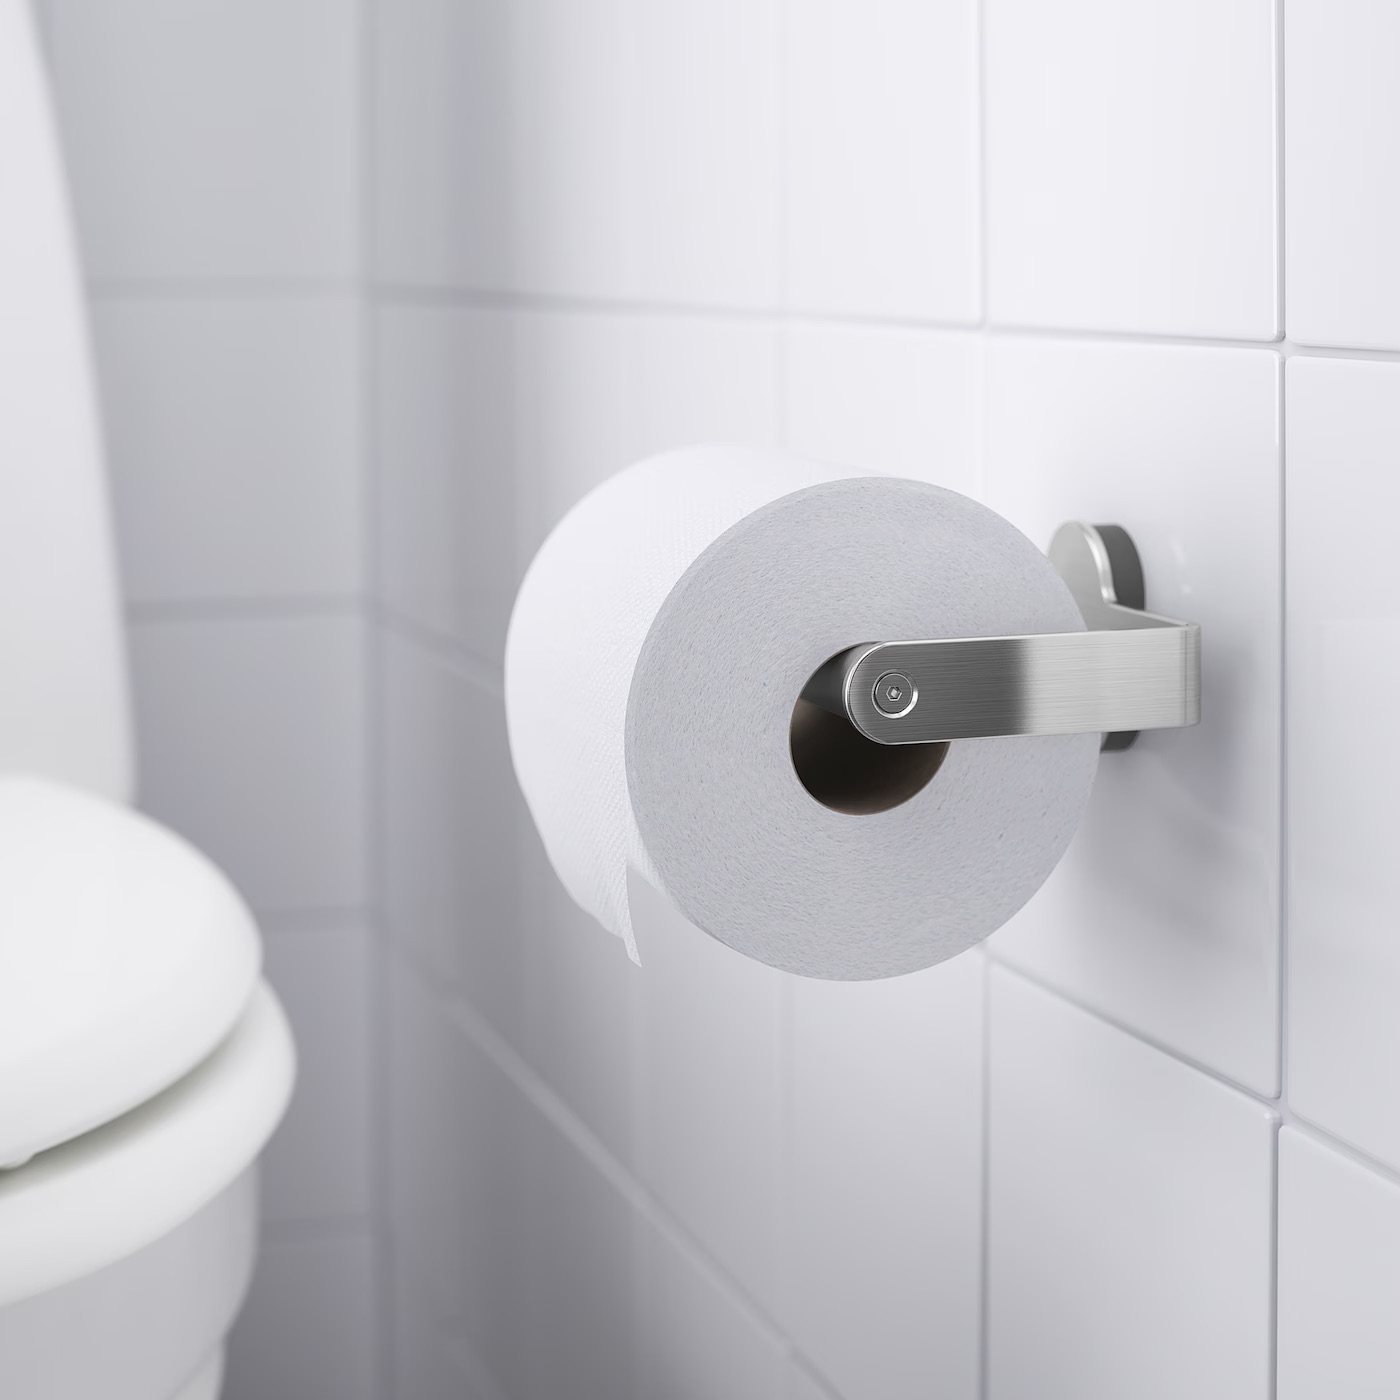 How To Fix Toilet Paper Holder On Wall